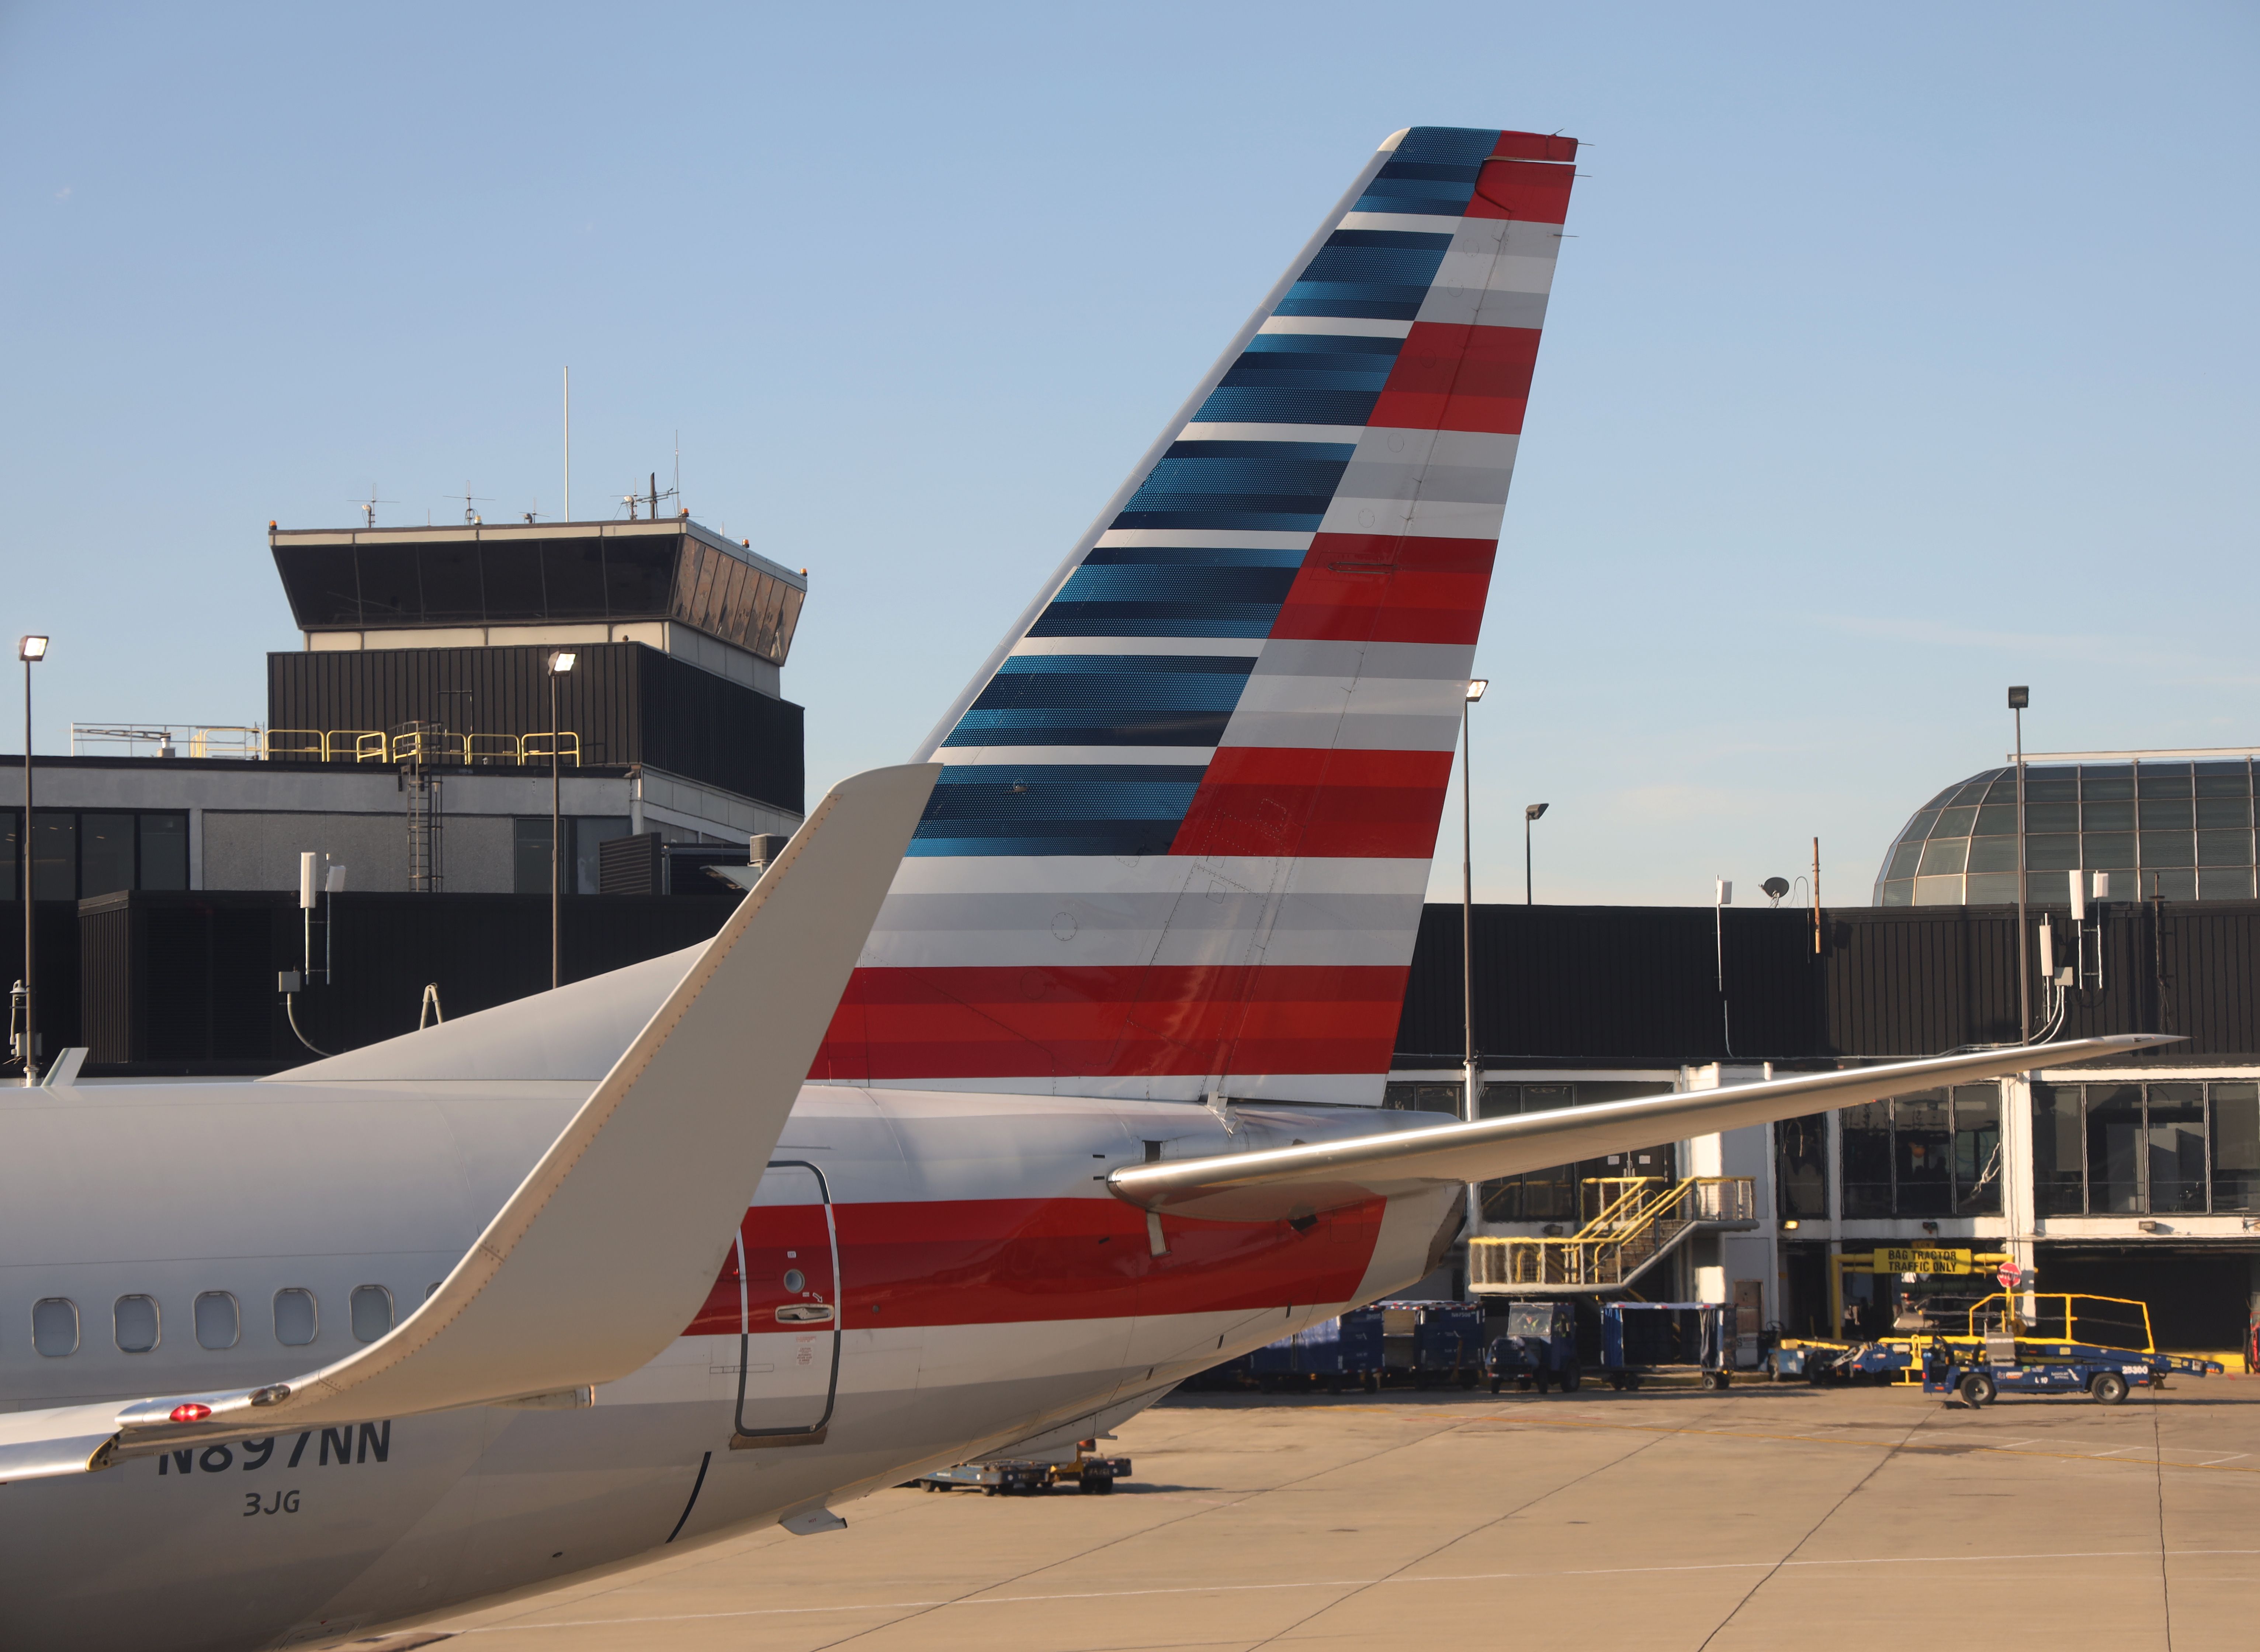 American Airlines Boeing 737-800 at Chicago O'Hare International Airport.